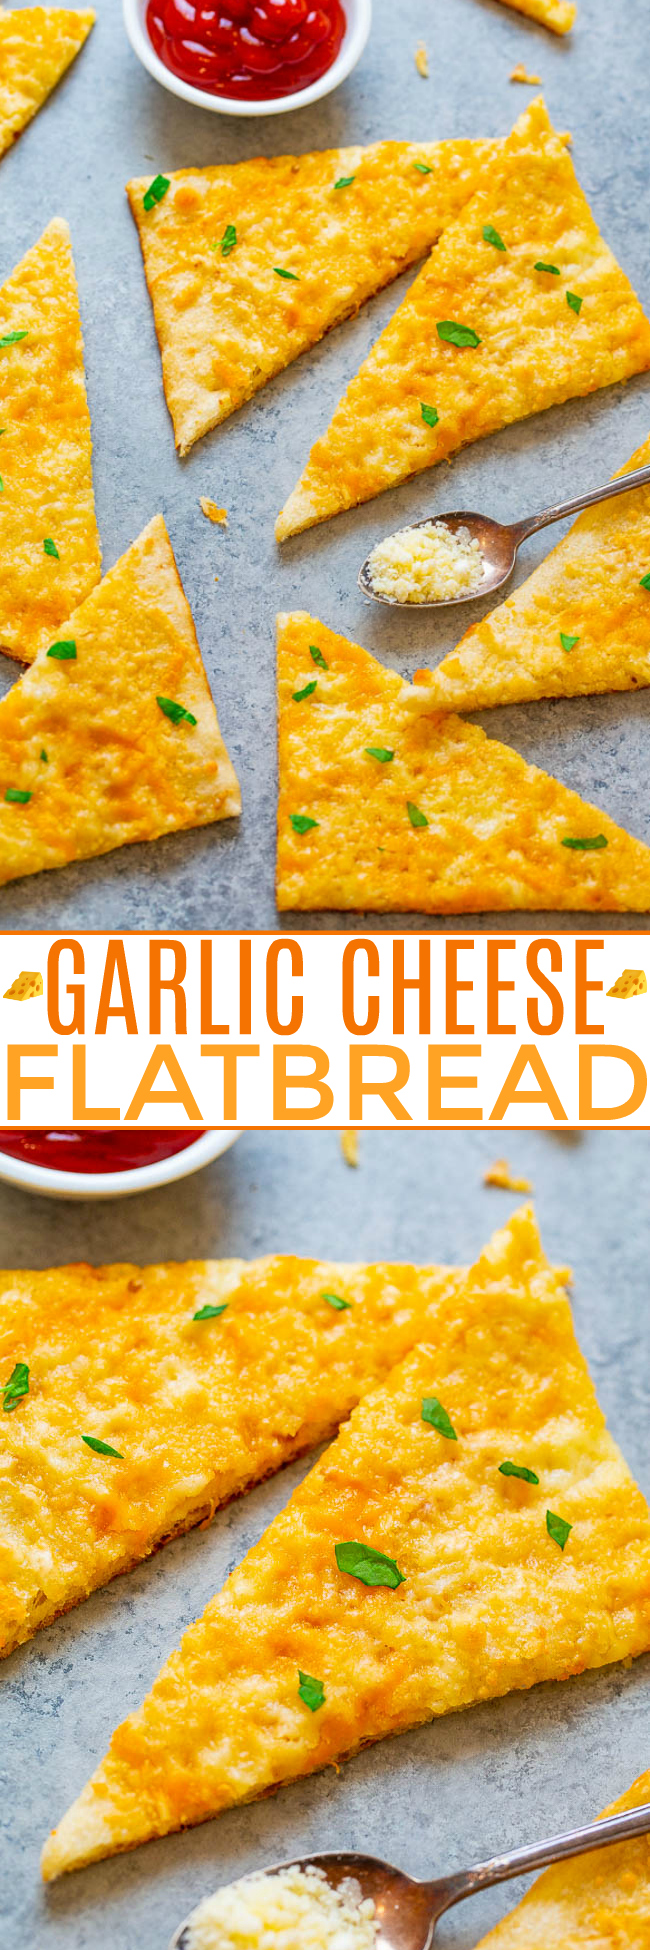 Garlic Cheese Flatbread - So EASY, just FIVE ingredients, ready in TEN minutes, and the perfect little party appetizer!! No one can say no to buttery garlic flatbread with two types of melted CHEESE!!